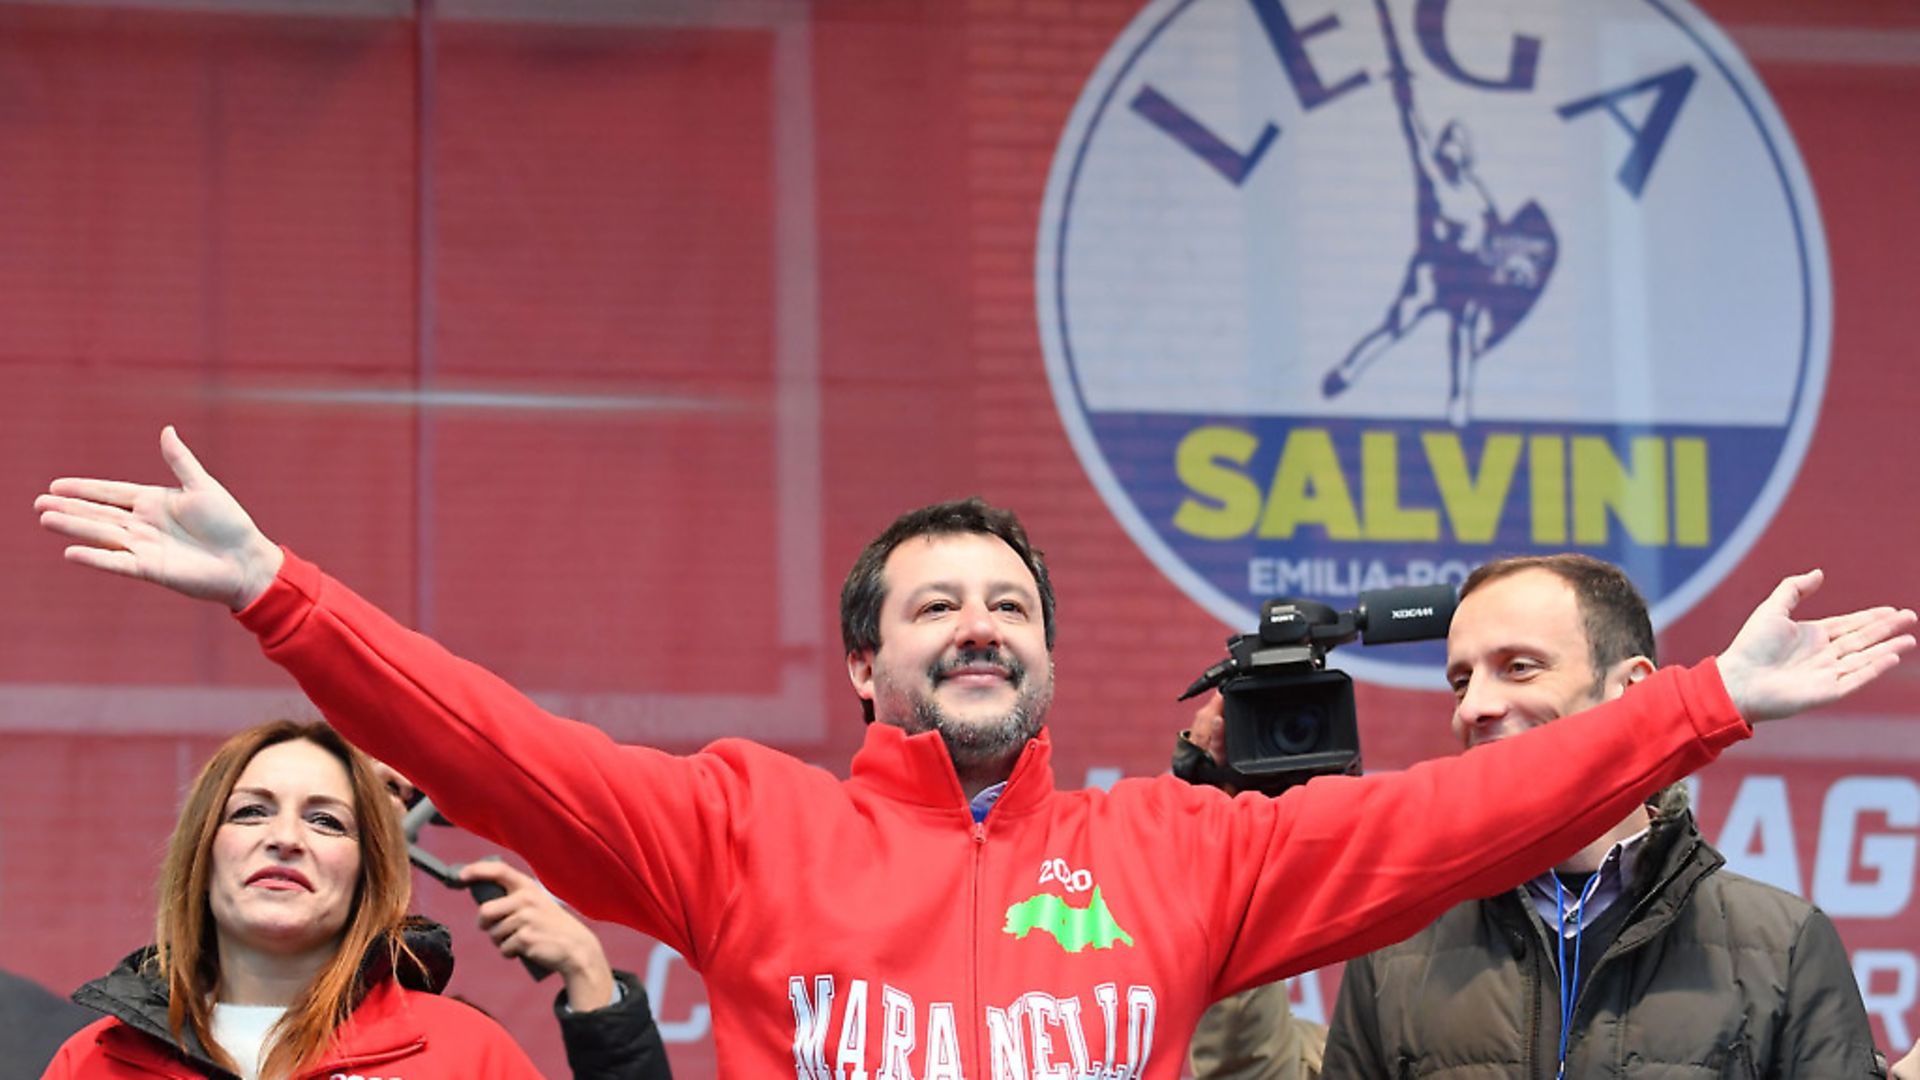 Leader of Italy's far-right League (Lega) party, Matteo Salvini (question three) Photo by ANDREAS SOLARO/AFP via Getty Images - Credit: AFP via Getty Images